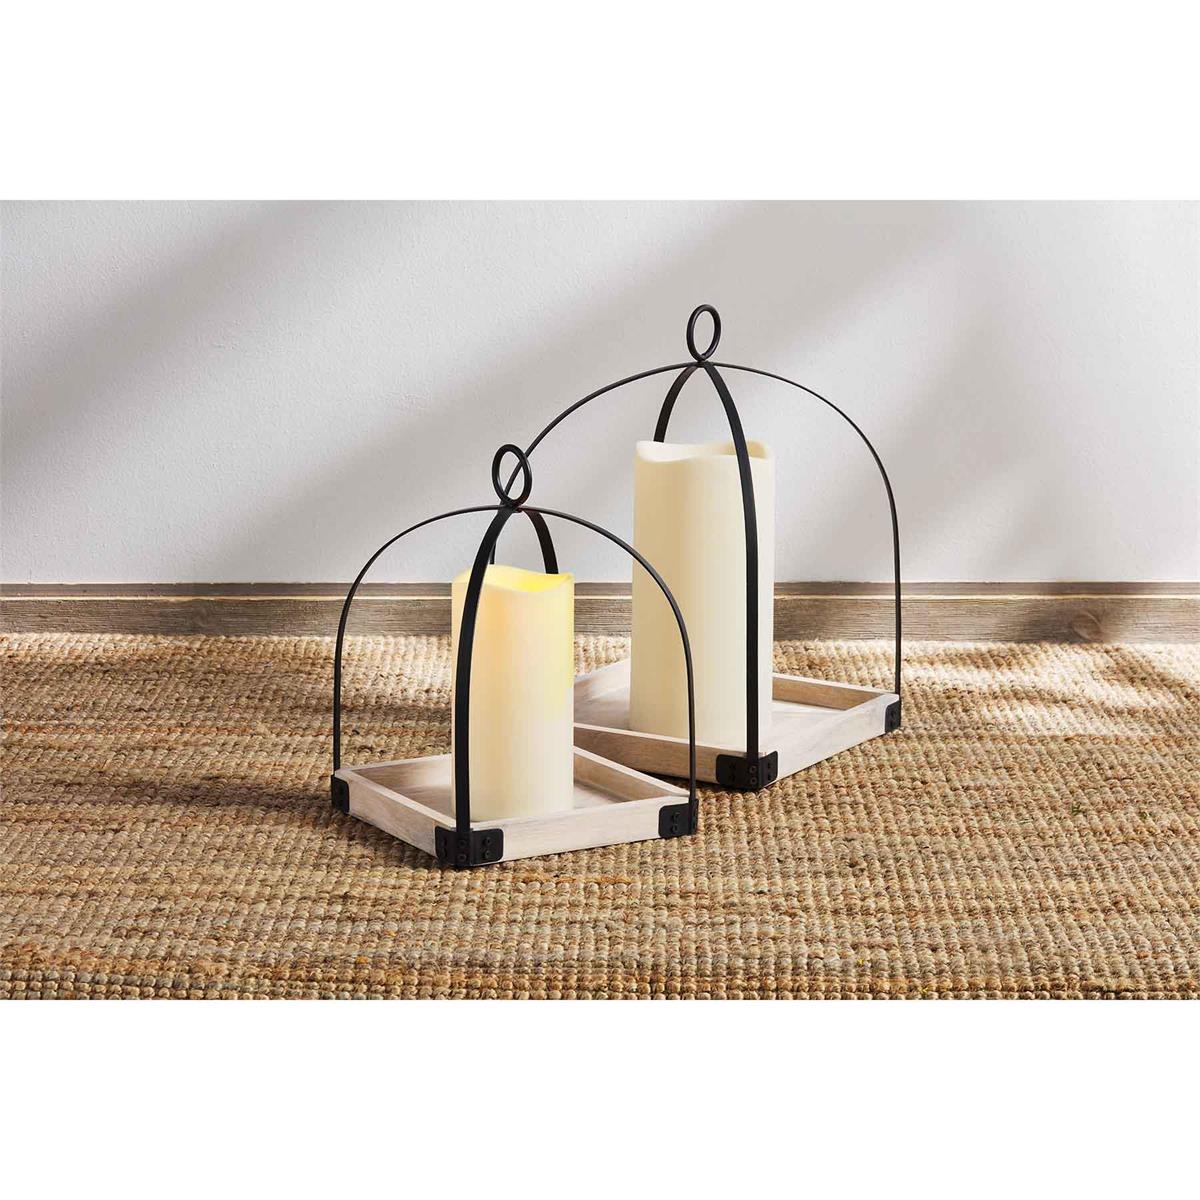 small and large iron lanterns displayed on a natural woven table runner